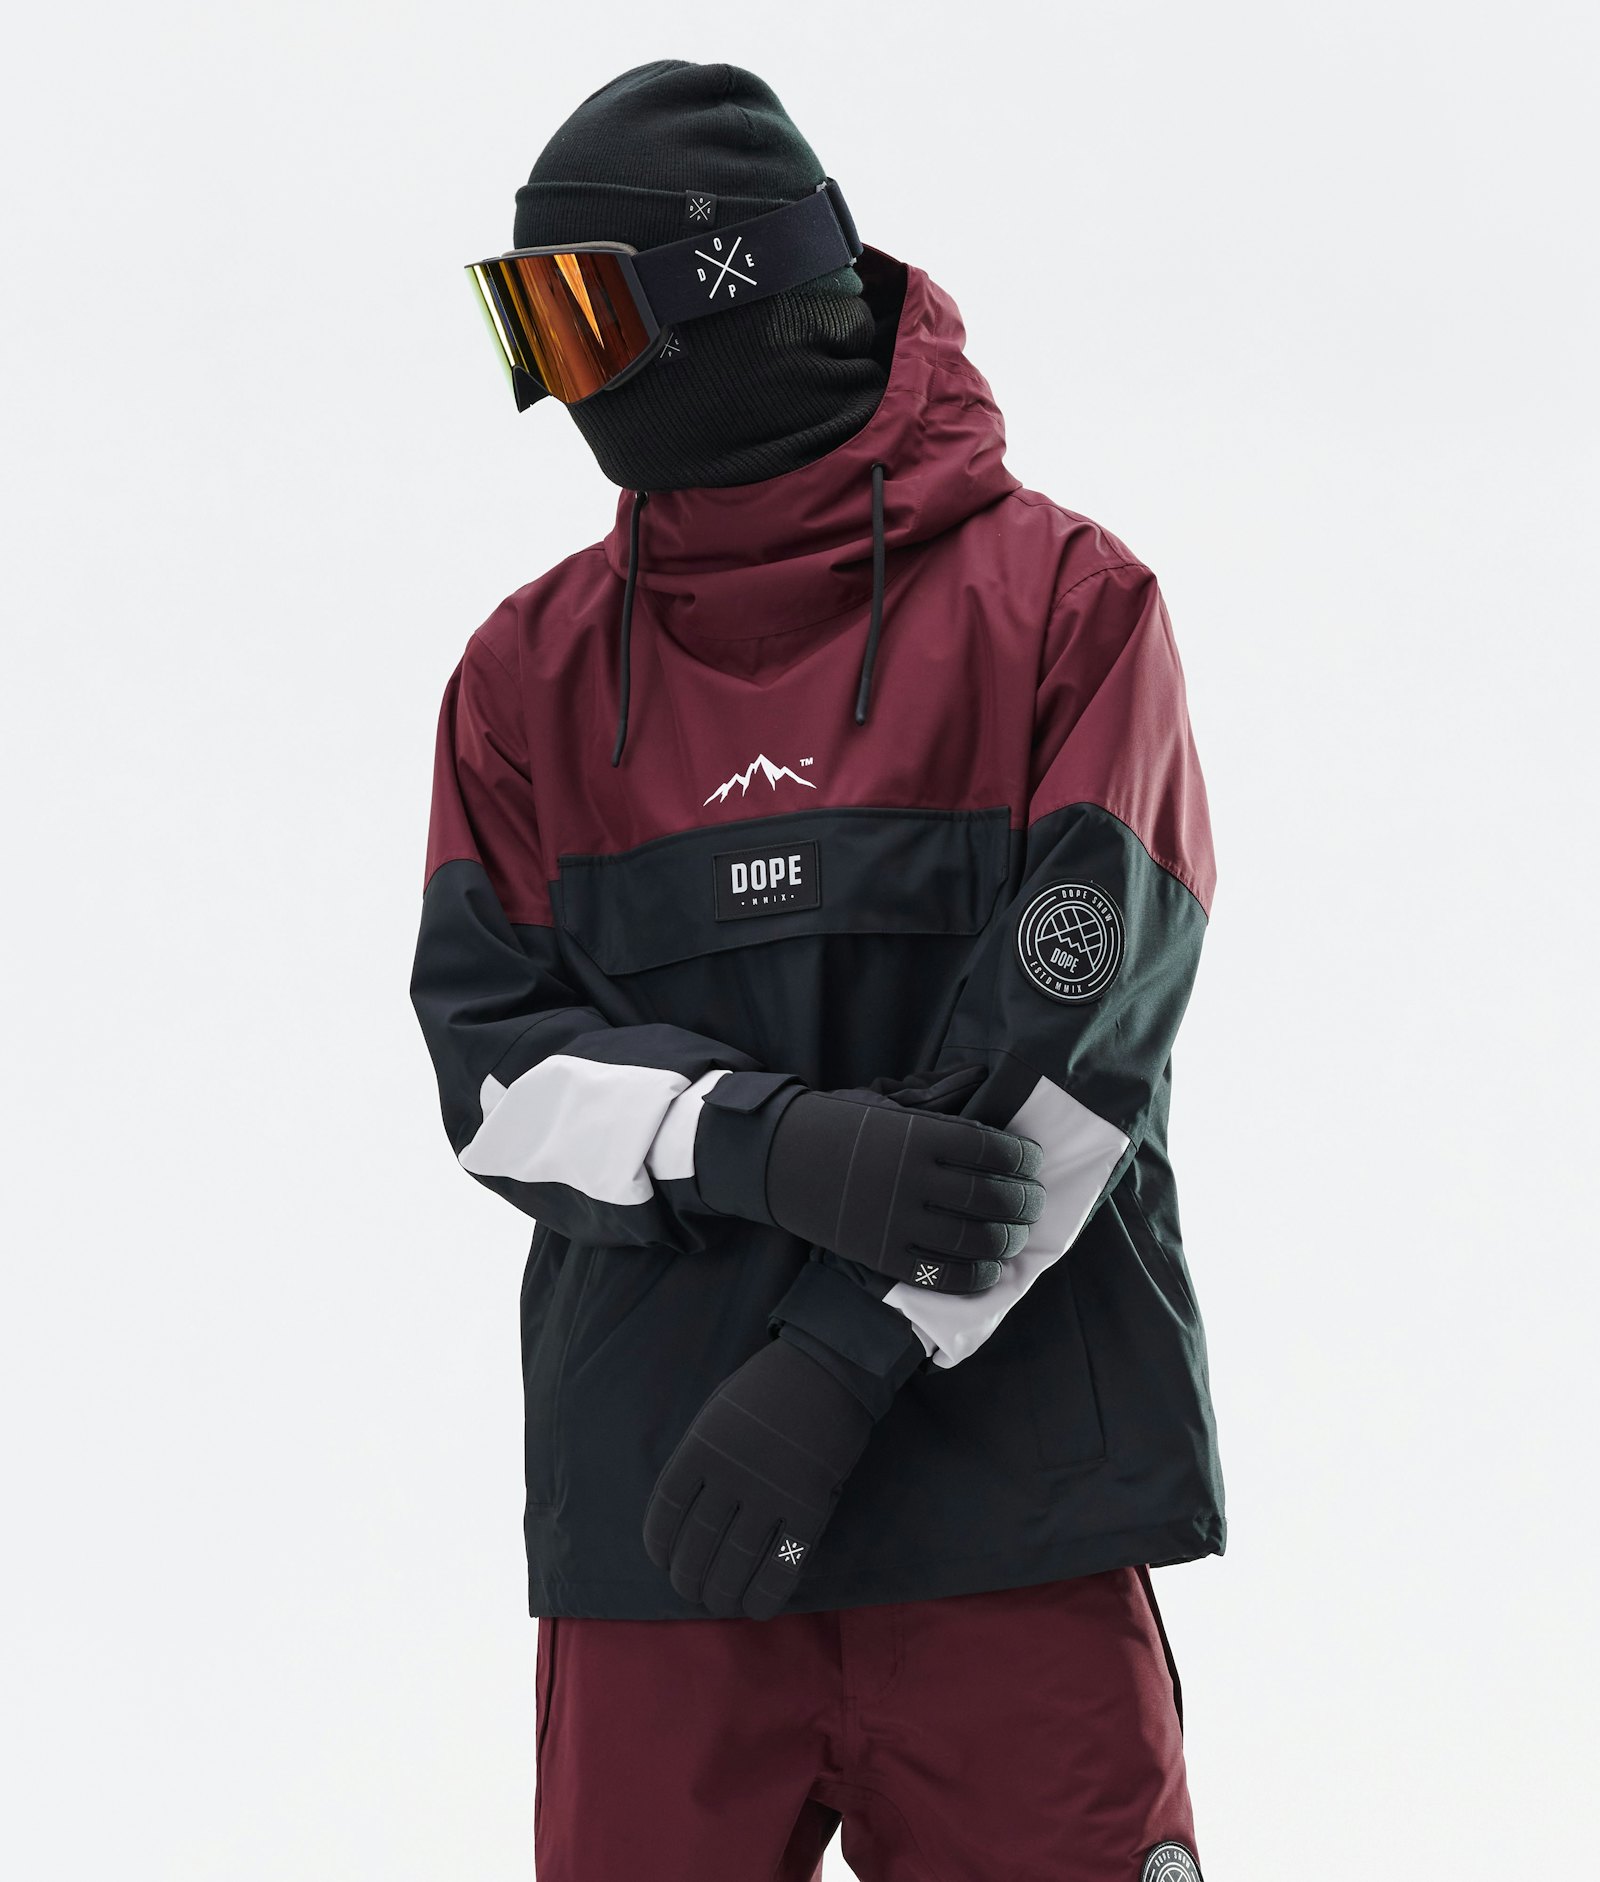 Dope Blizzard 2020 Snowboard Jacket Men Limited Edition Burgundy Multicolour, Image 1 of 8